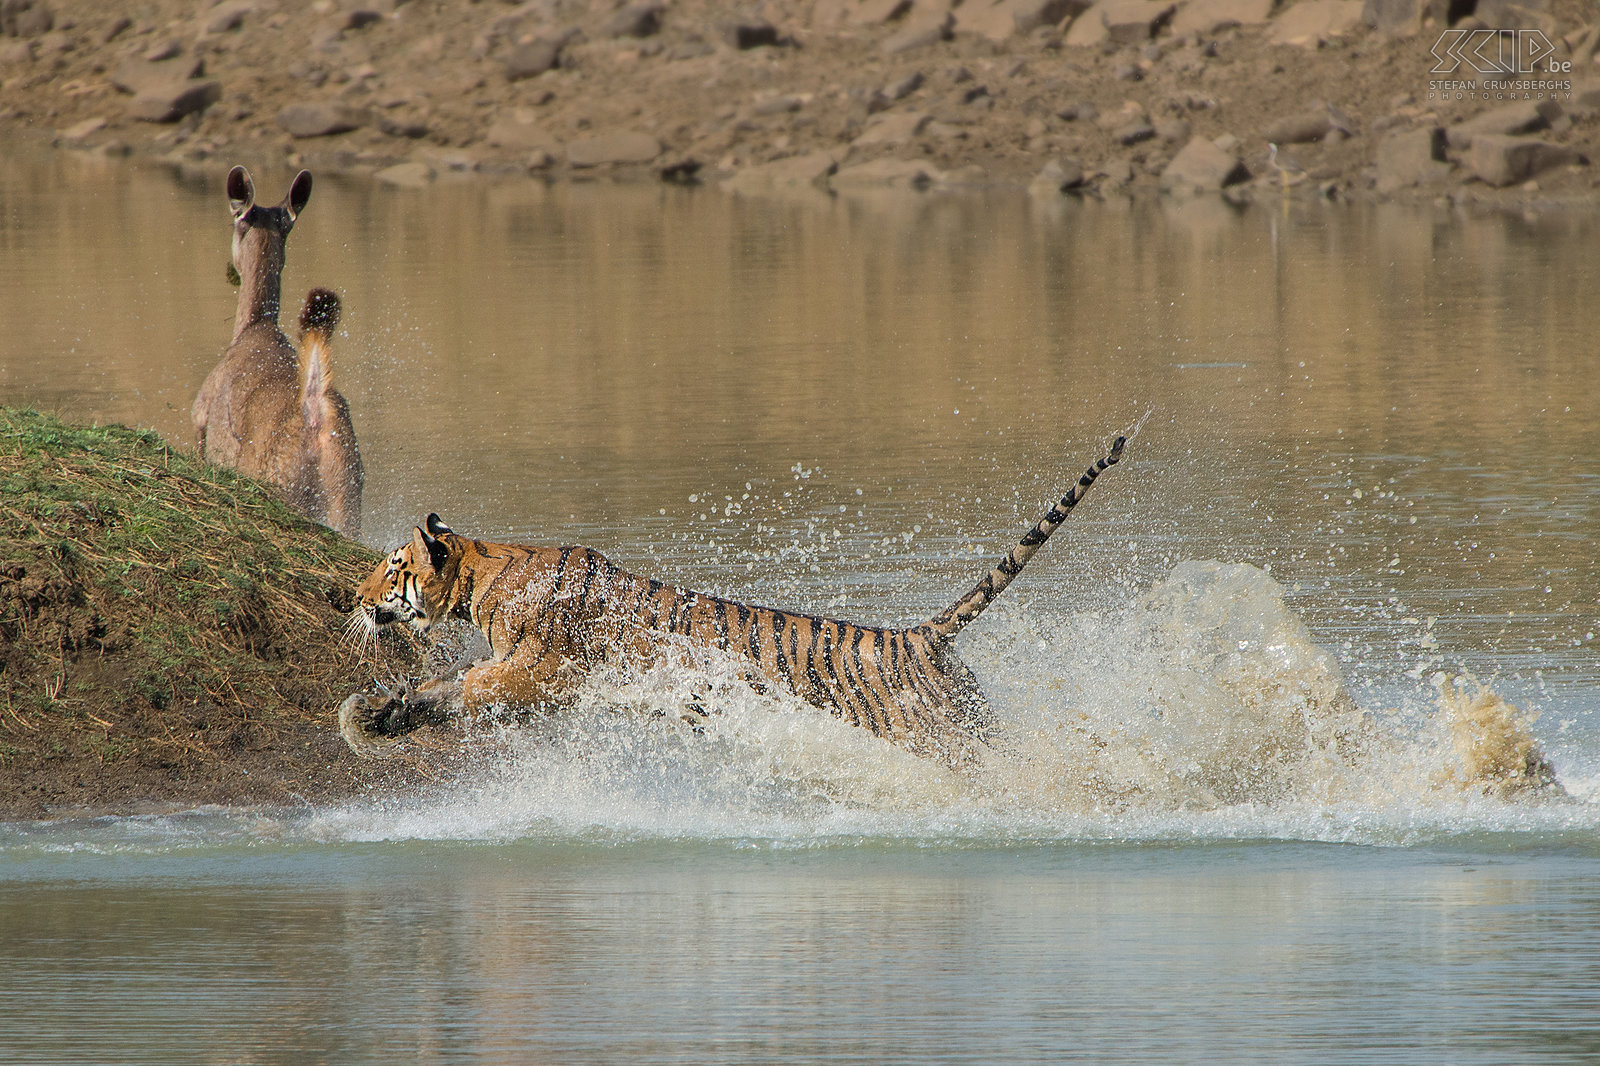 Tadoba - Tiger attack The tigress didn’t catch a deer but it was amazing to see this majestic animal in action. But the magical moment was not finished yet ... Stefan Cruysberghs